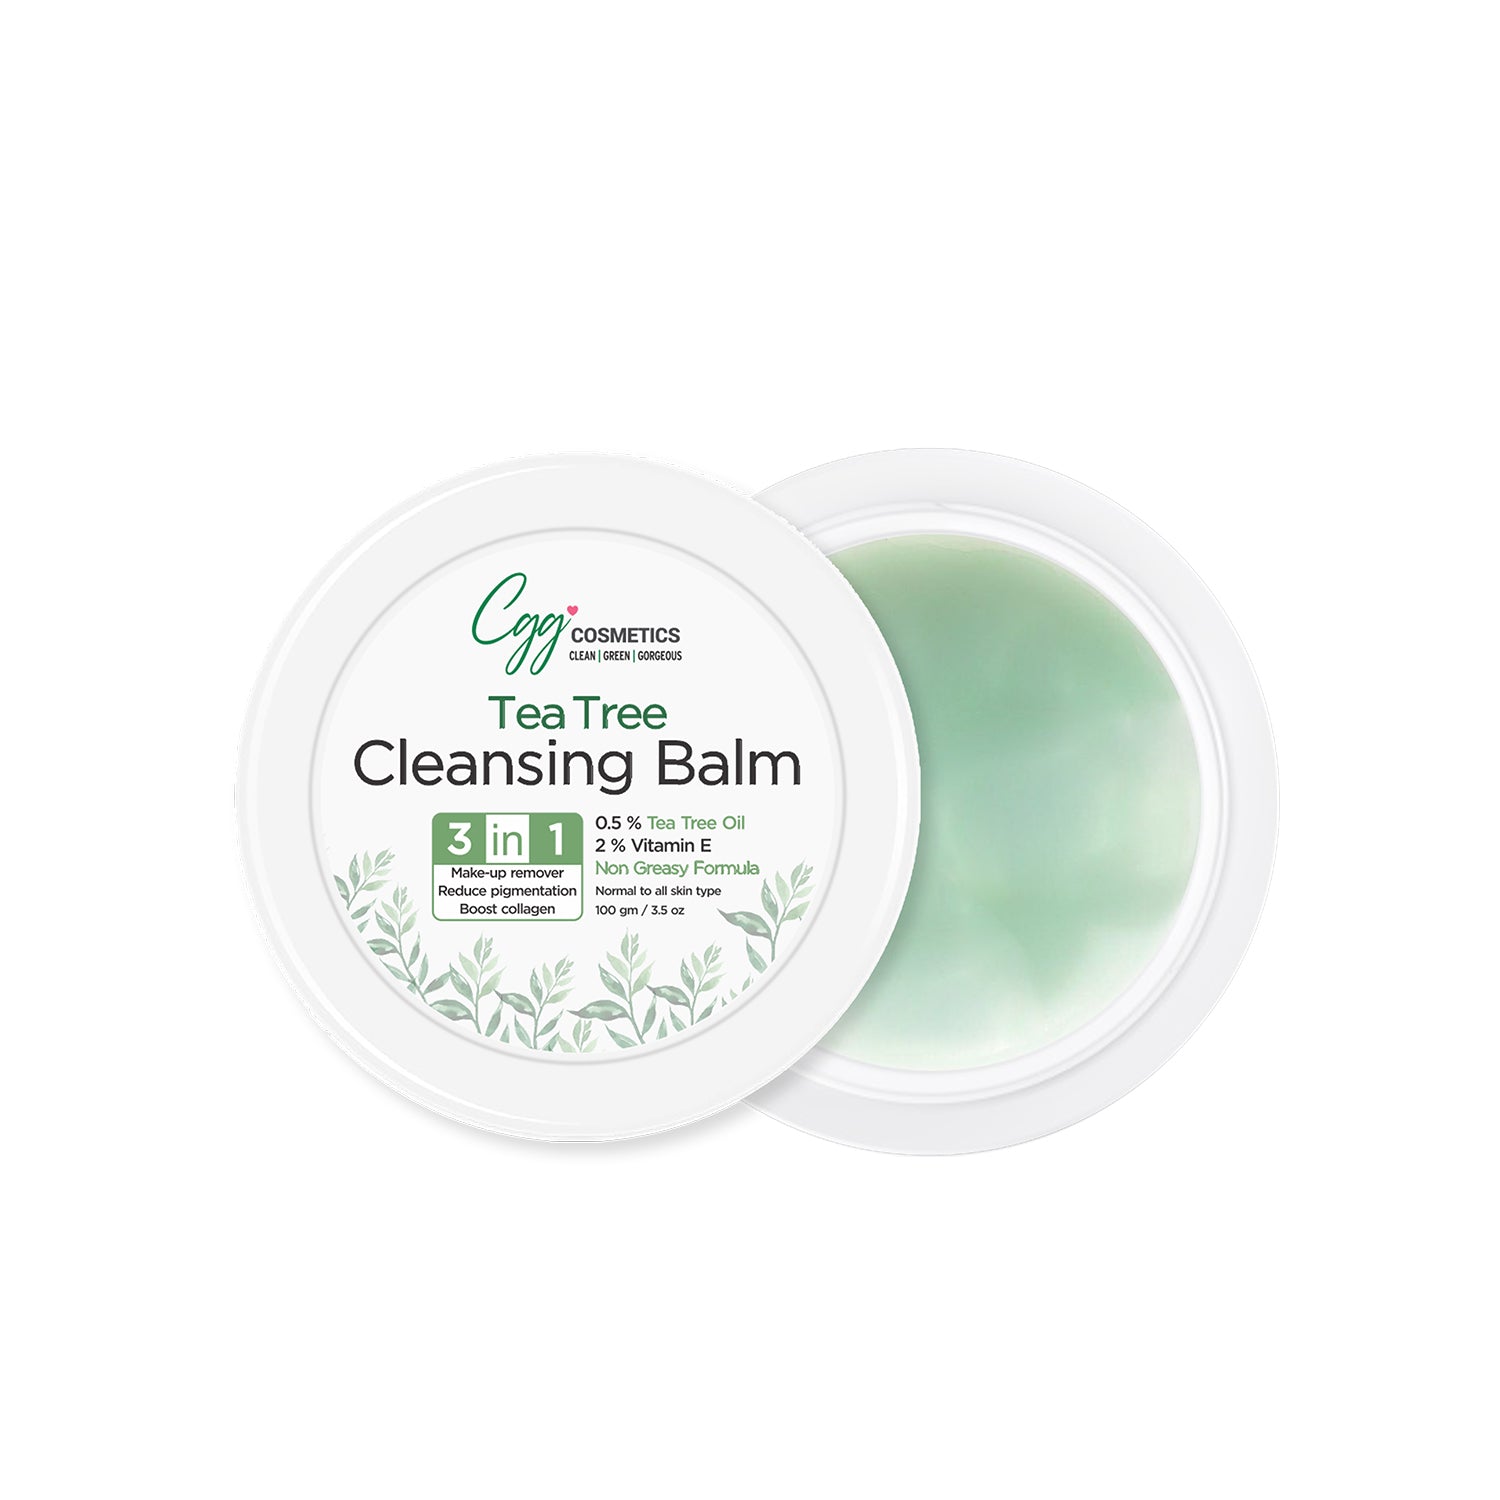 CGG Cosmetics Tea Tree Cleansing Balm | 3 in 1 Makeup Remover, Reduce Pigmentation & Boost Collagen - 100gm